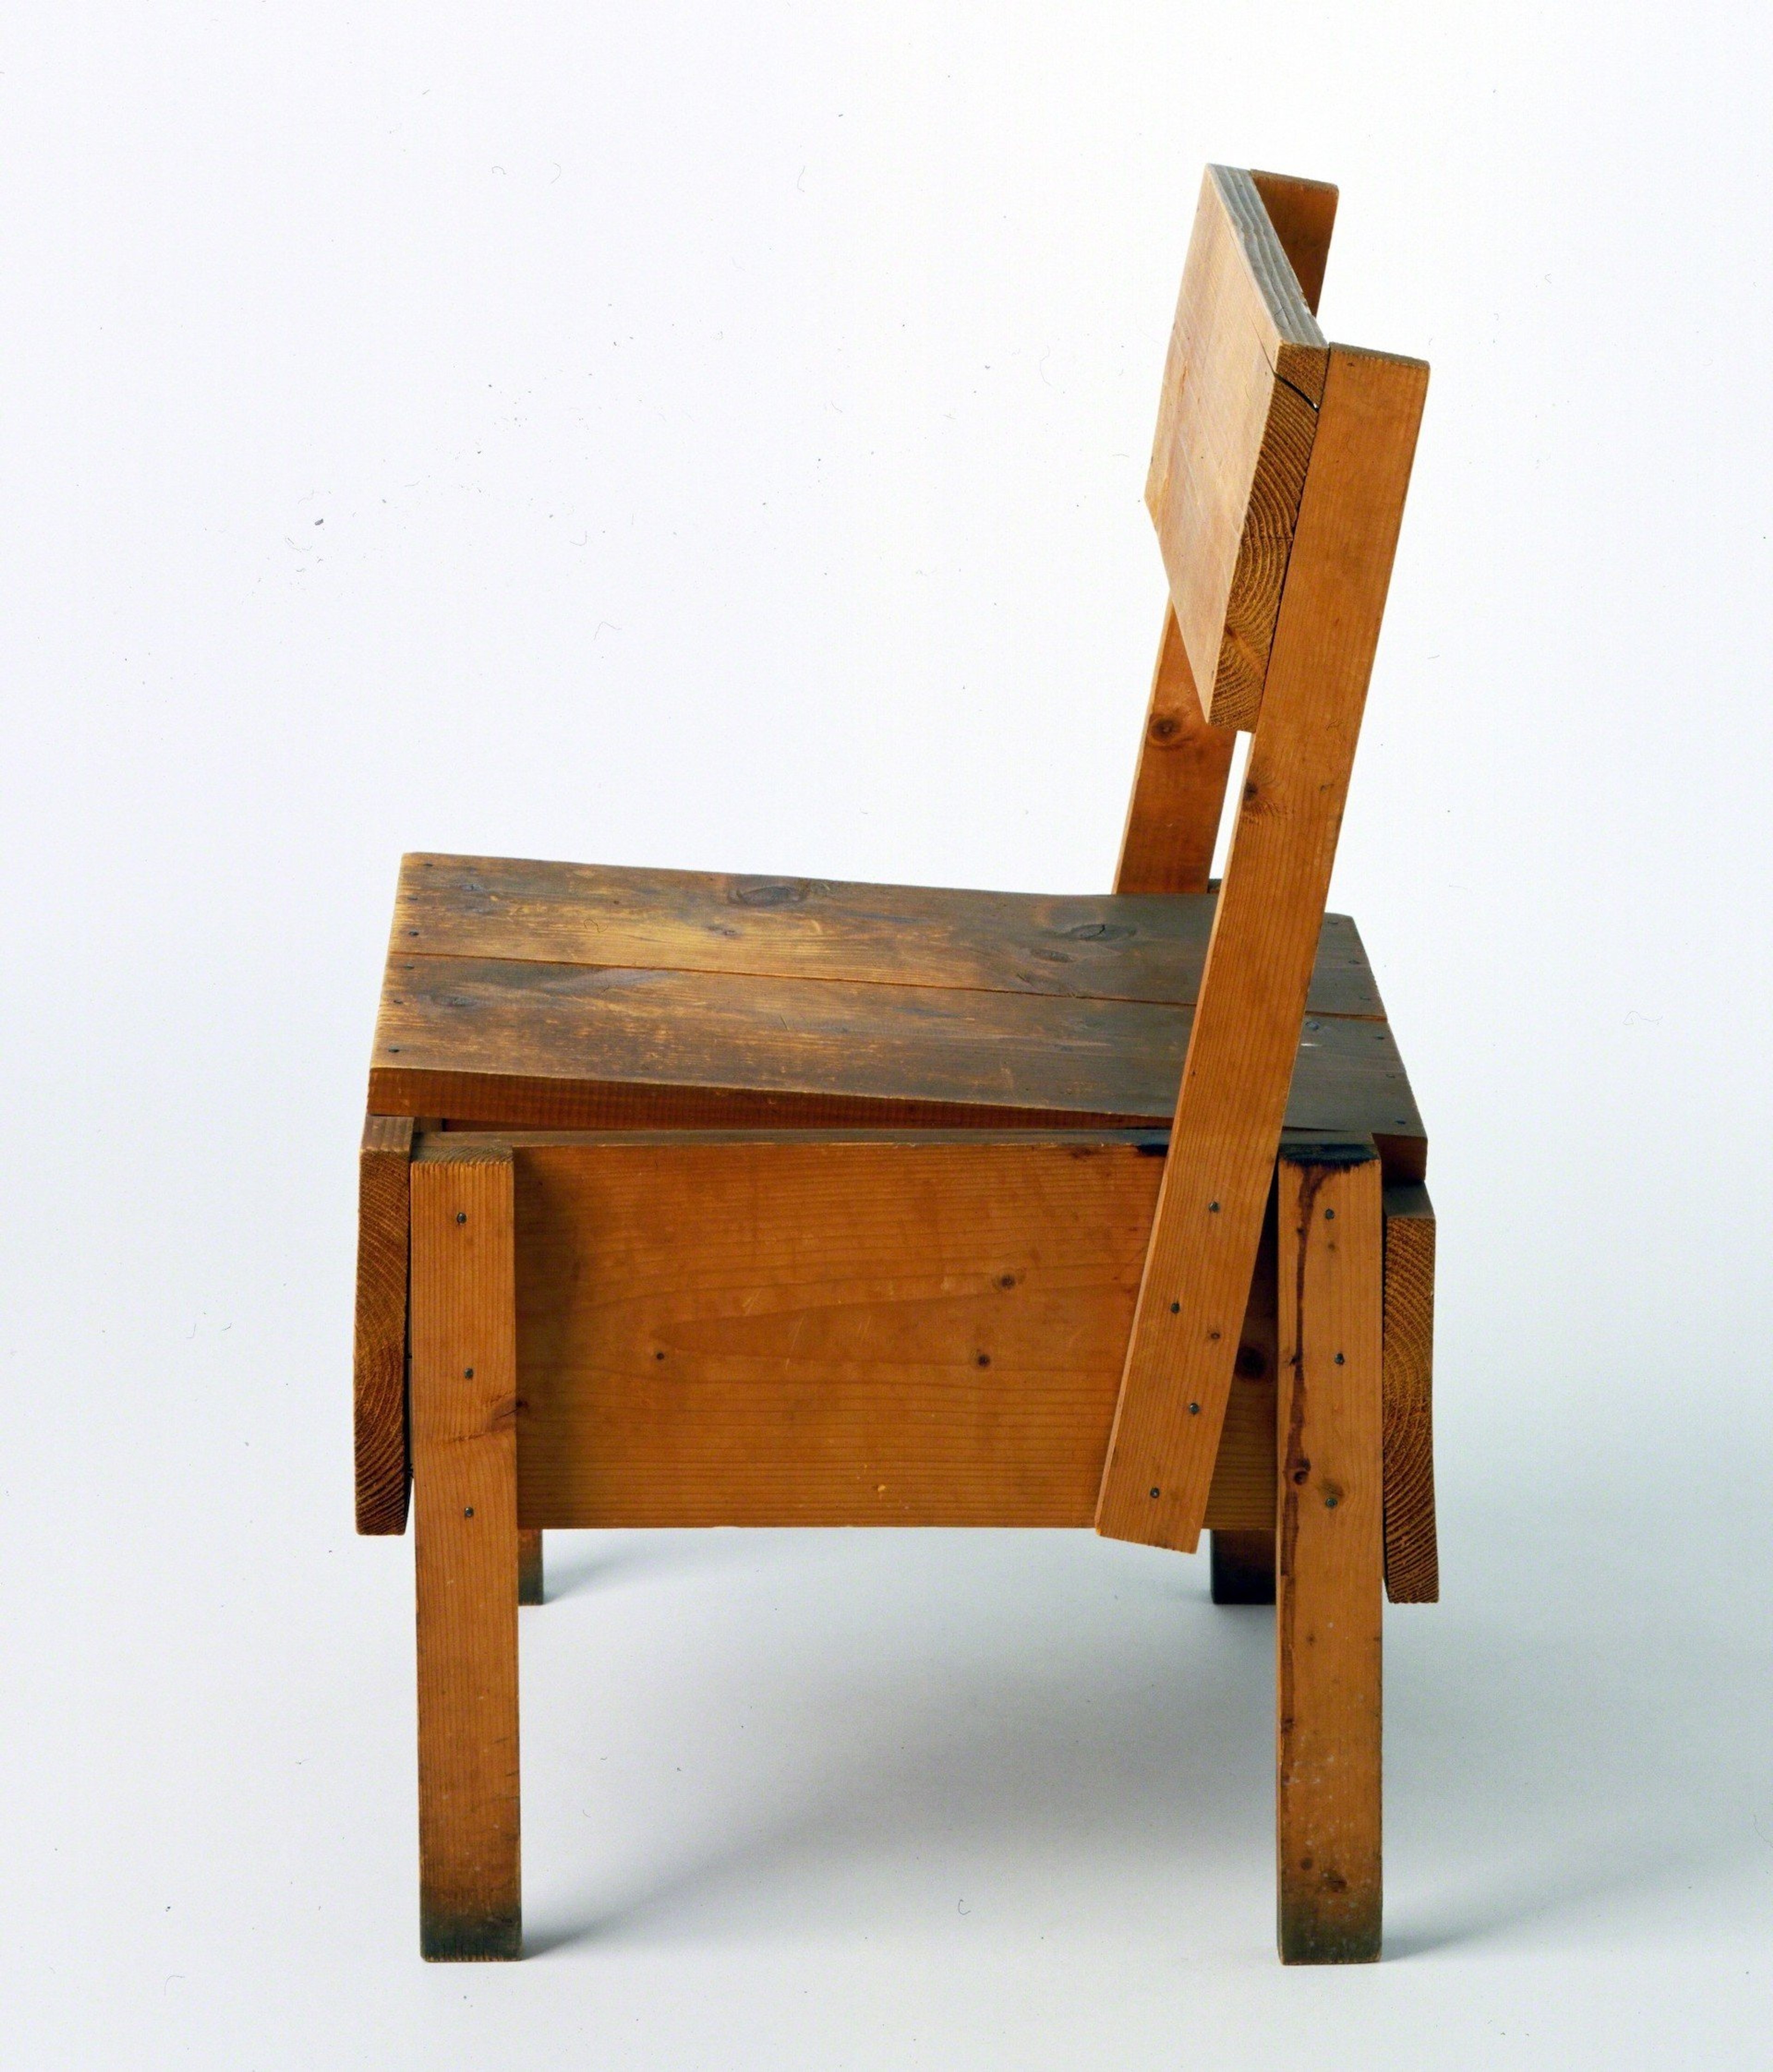 Photograph of a chair designed by Enzo Mari